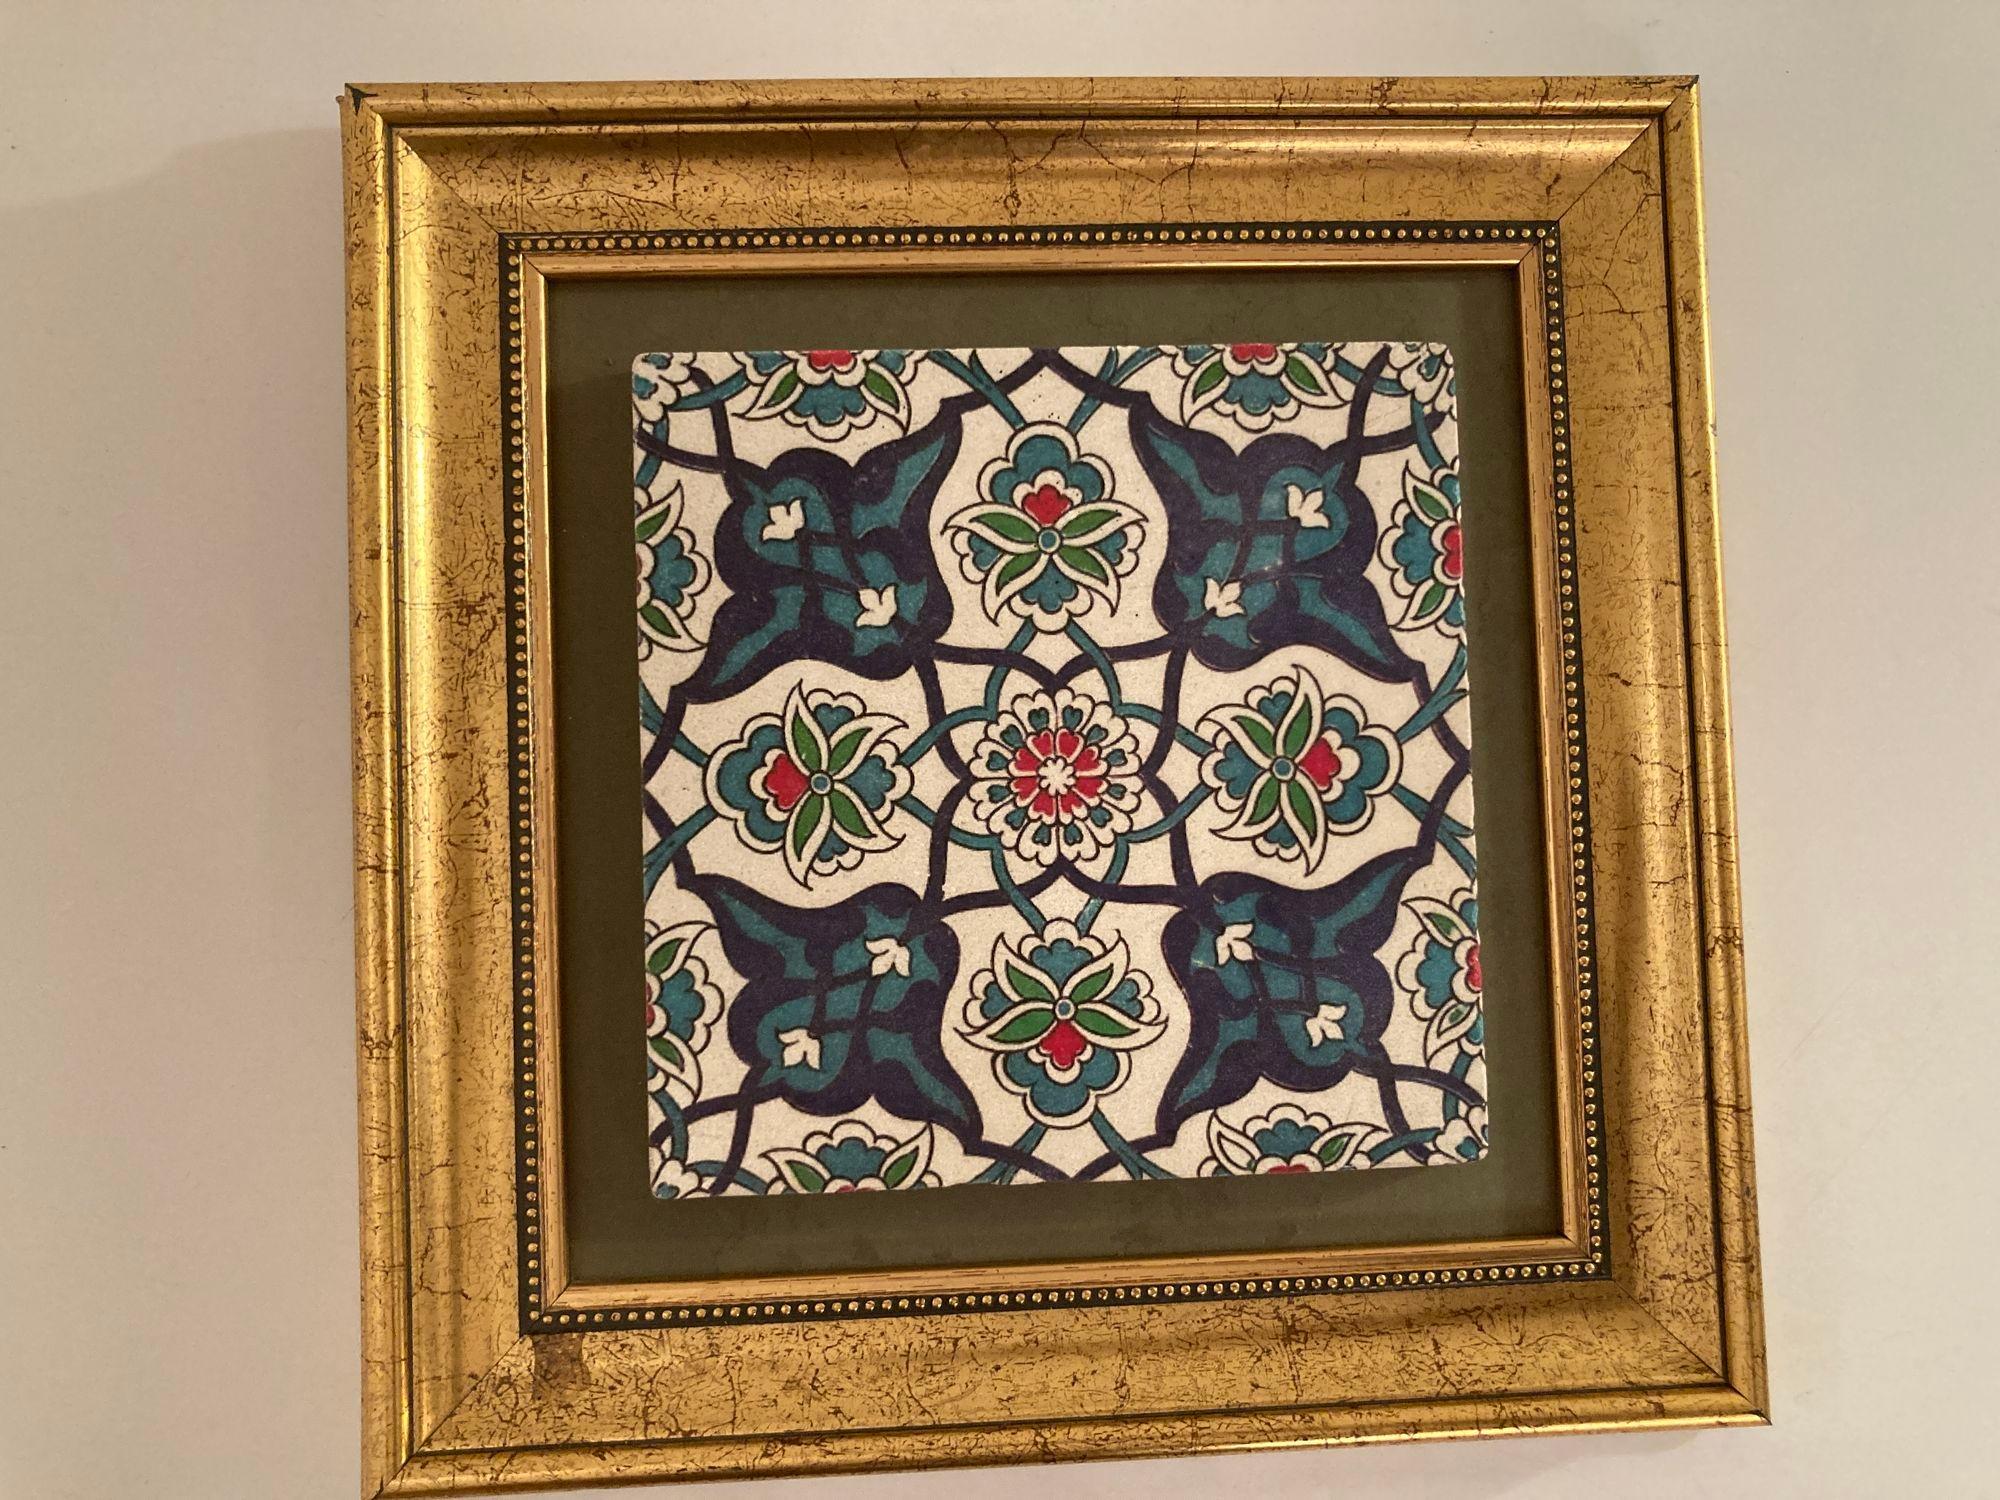 Handcrafted Turkish Iznik style pottery tile framed.
Turkish traditional Iznik tile with polychrome decoration of stylized flower designs in black, blue, green and turquoise on white background.
20th century Iznik pottery tile decorated with